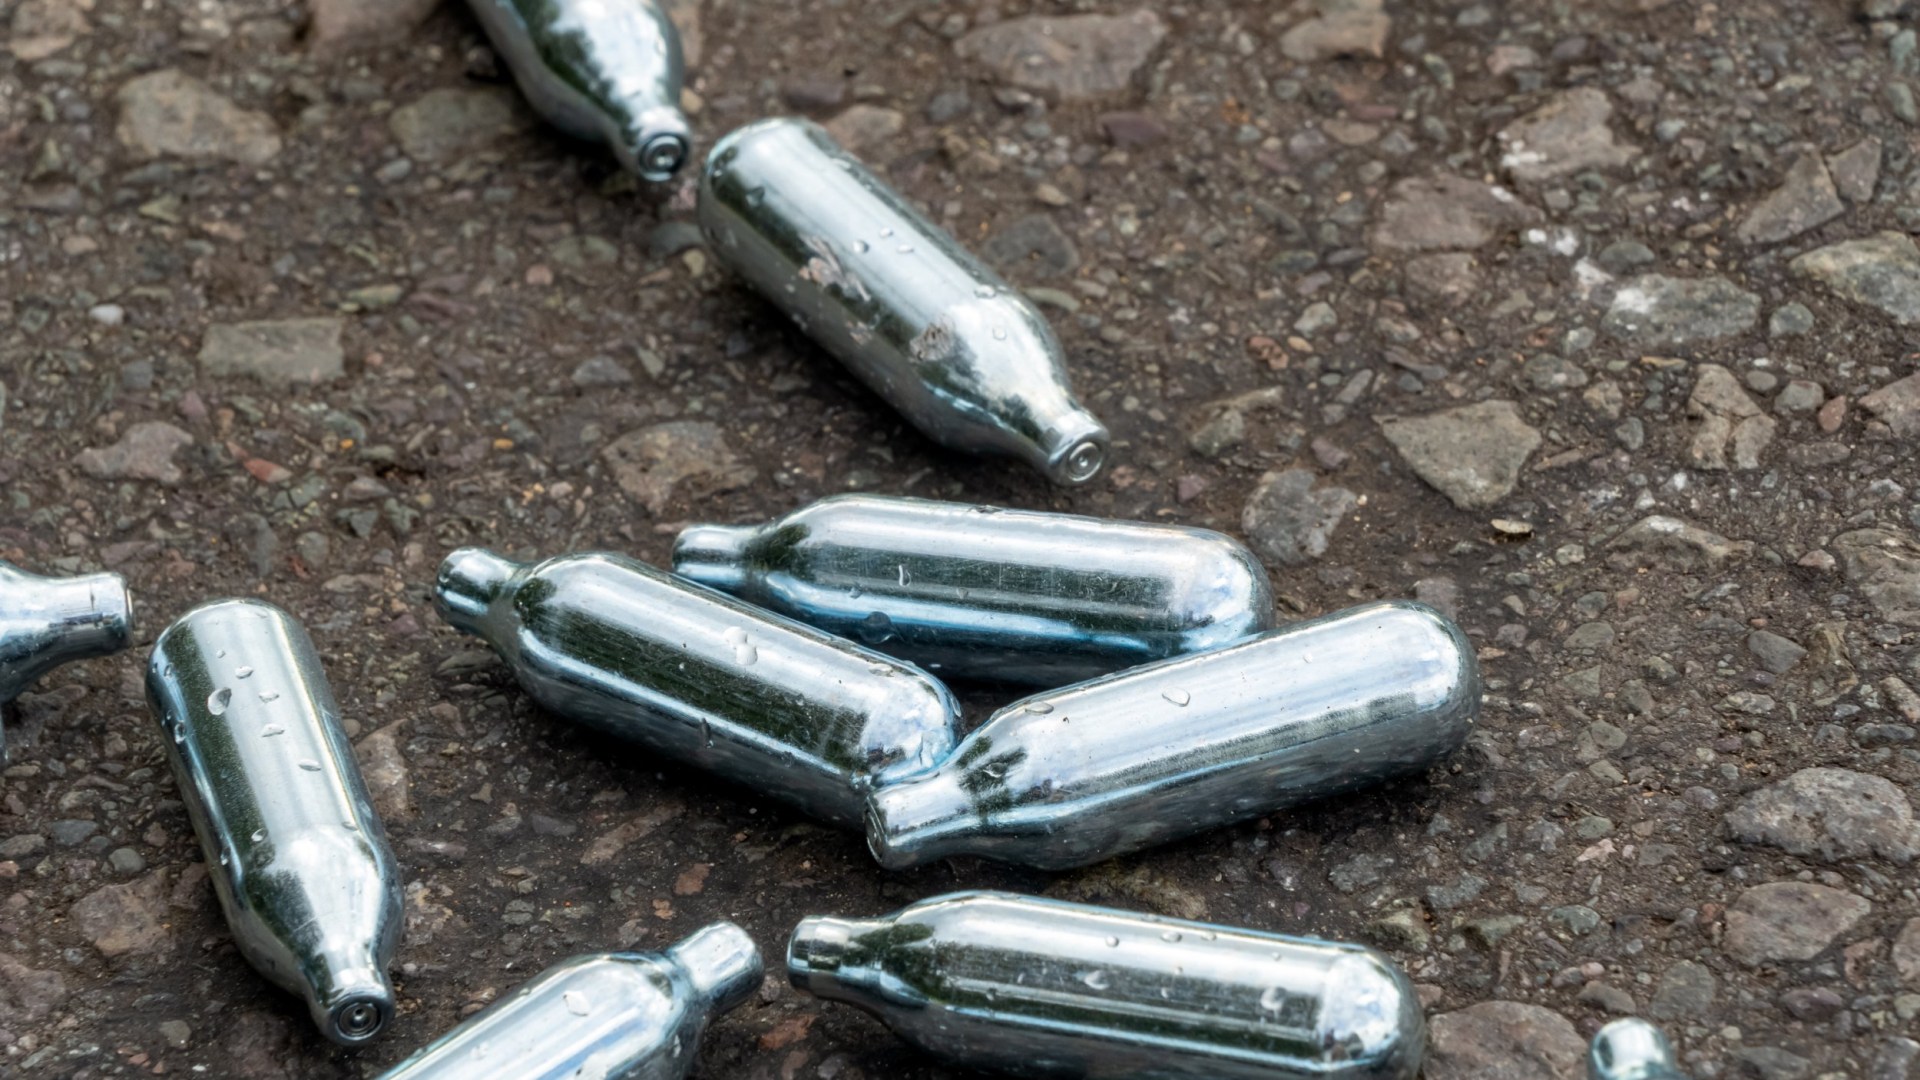 HSE issueurgent alert over laughing gas drugwith immediate risk of overdose as they warn of long-term health issues [Video]